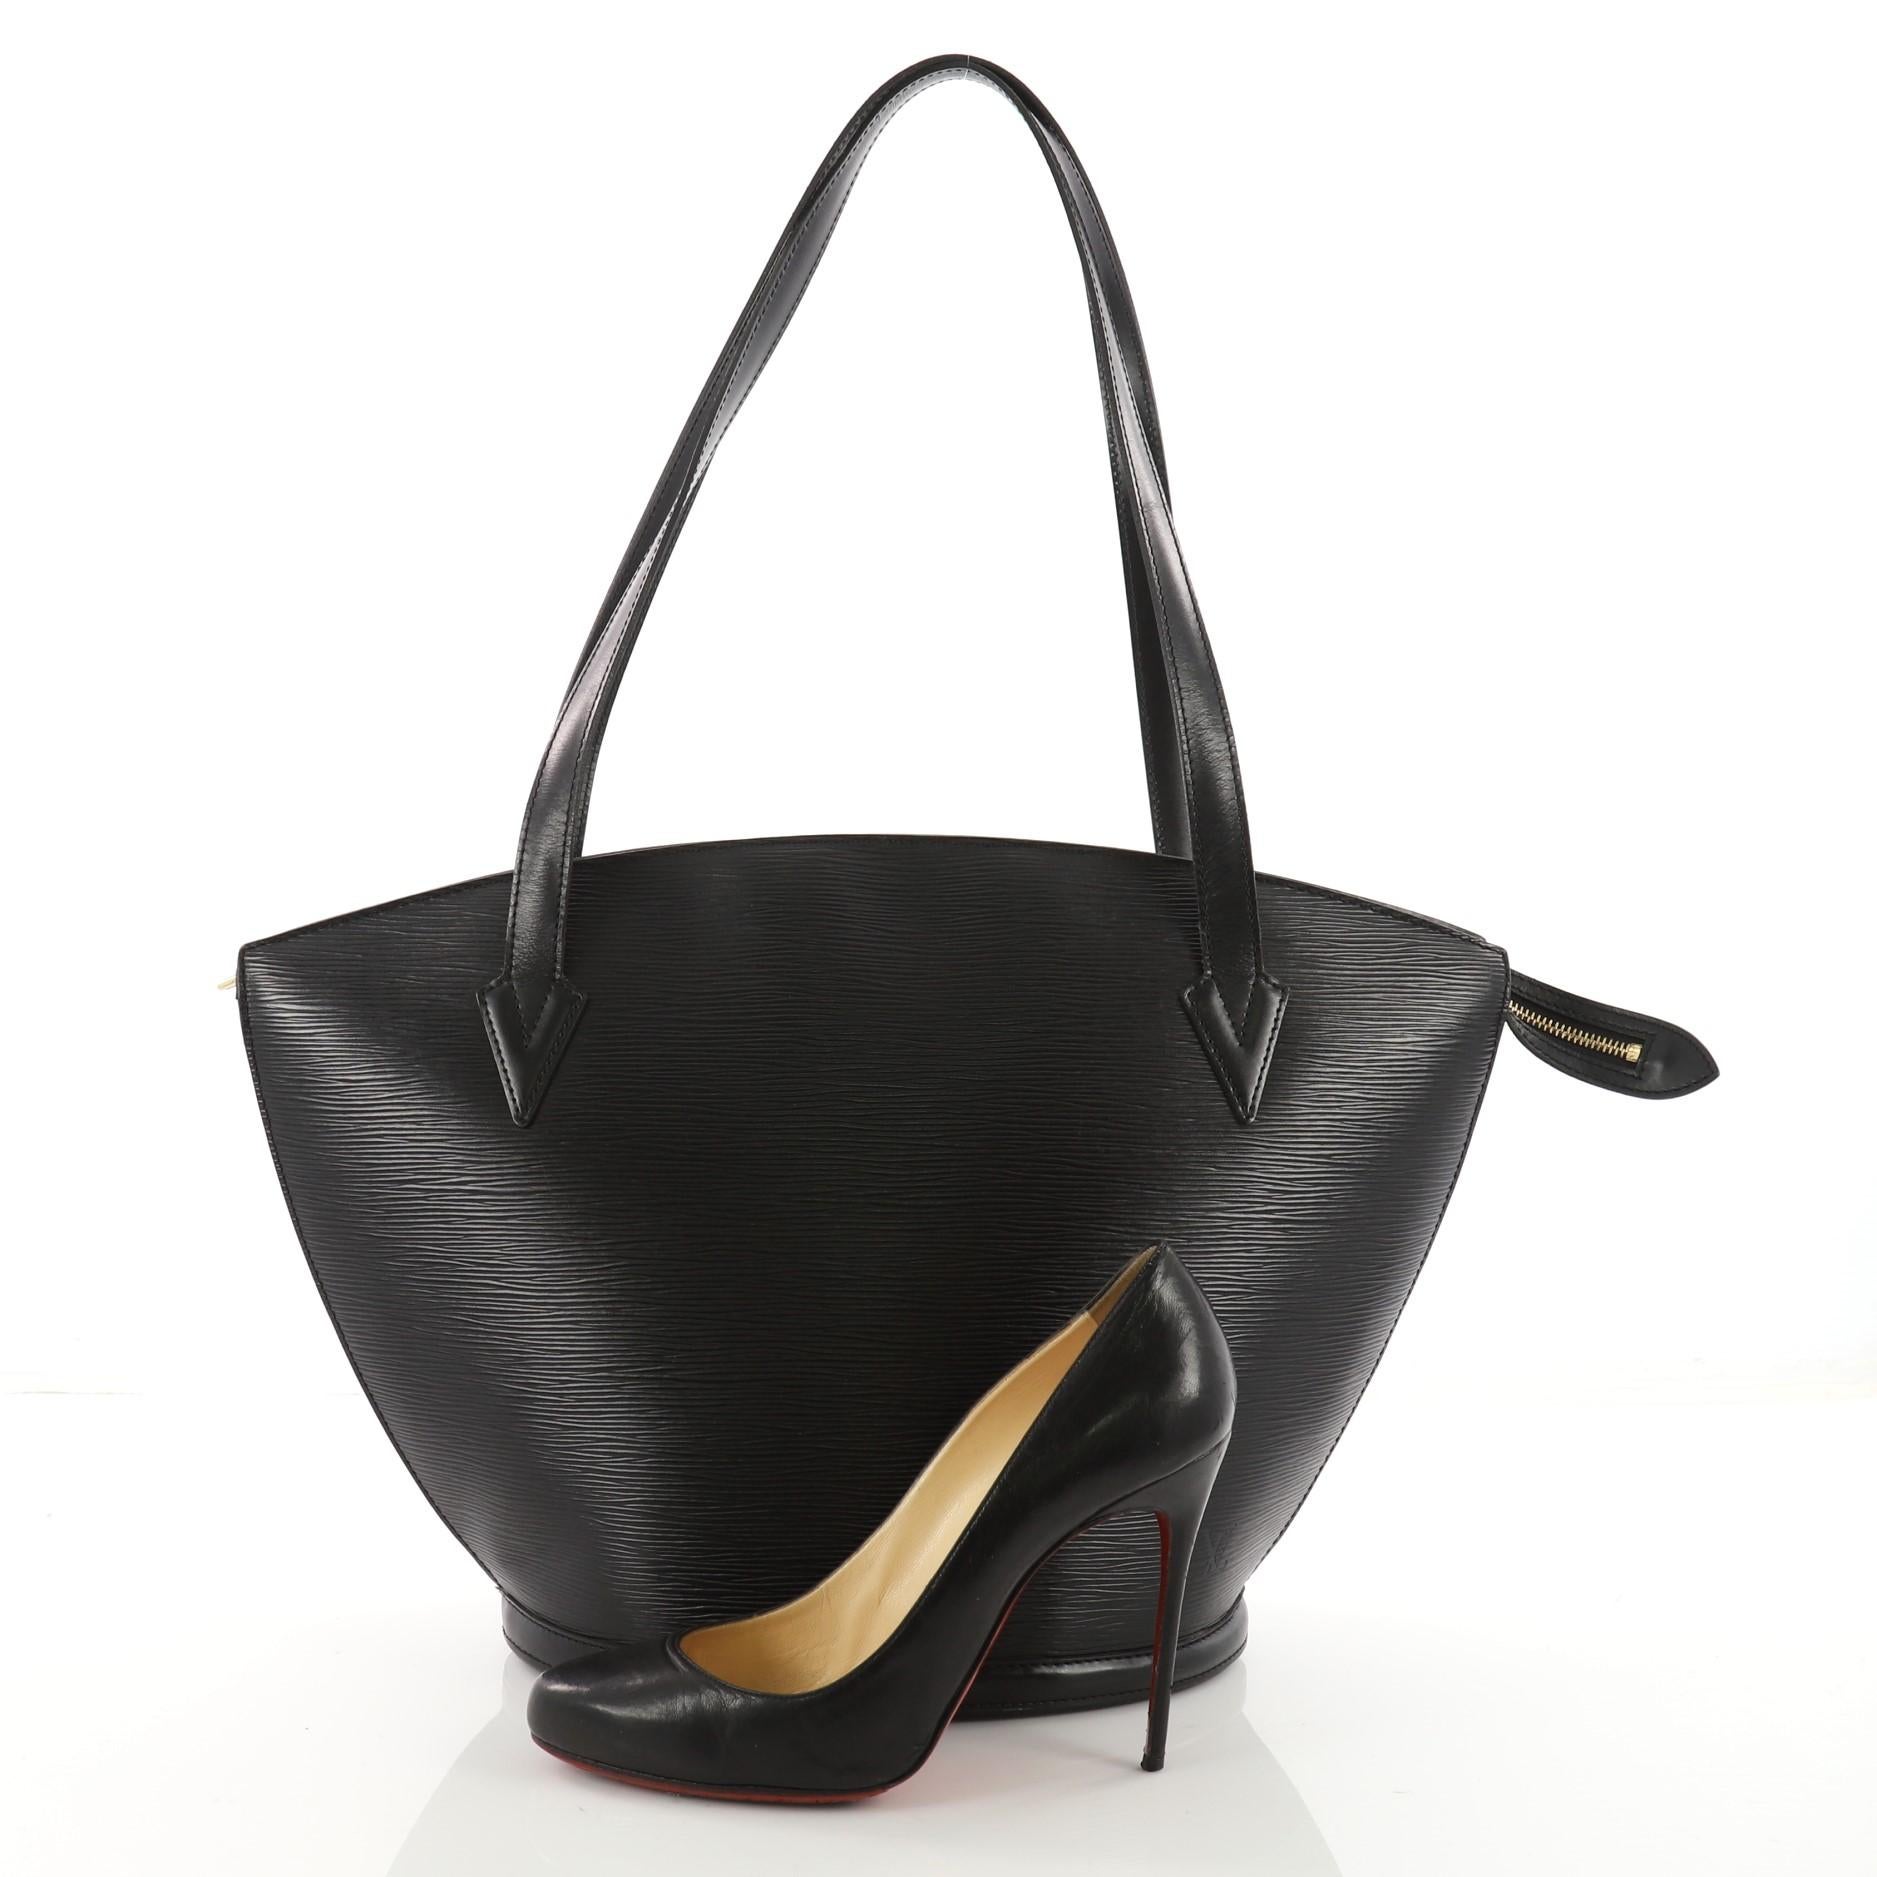 This authentic Louis Vuitton Saint Jacques Handbag Epi Leather GM is refined and elegant. Crafted from Louis Vuitton's signature black epi leather and sturdy base, this fan-shaped bag features dual leather straps, subtle LV logo at the front and